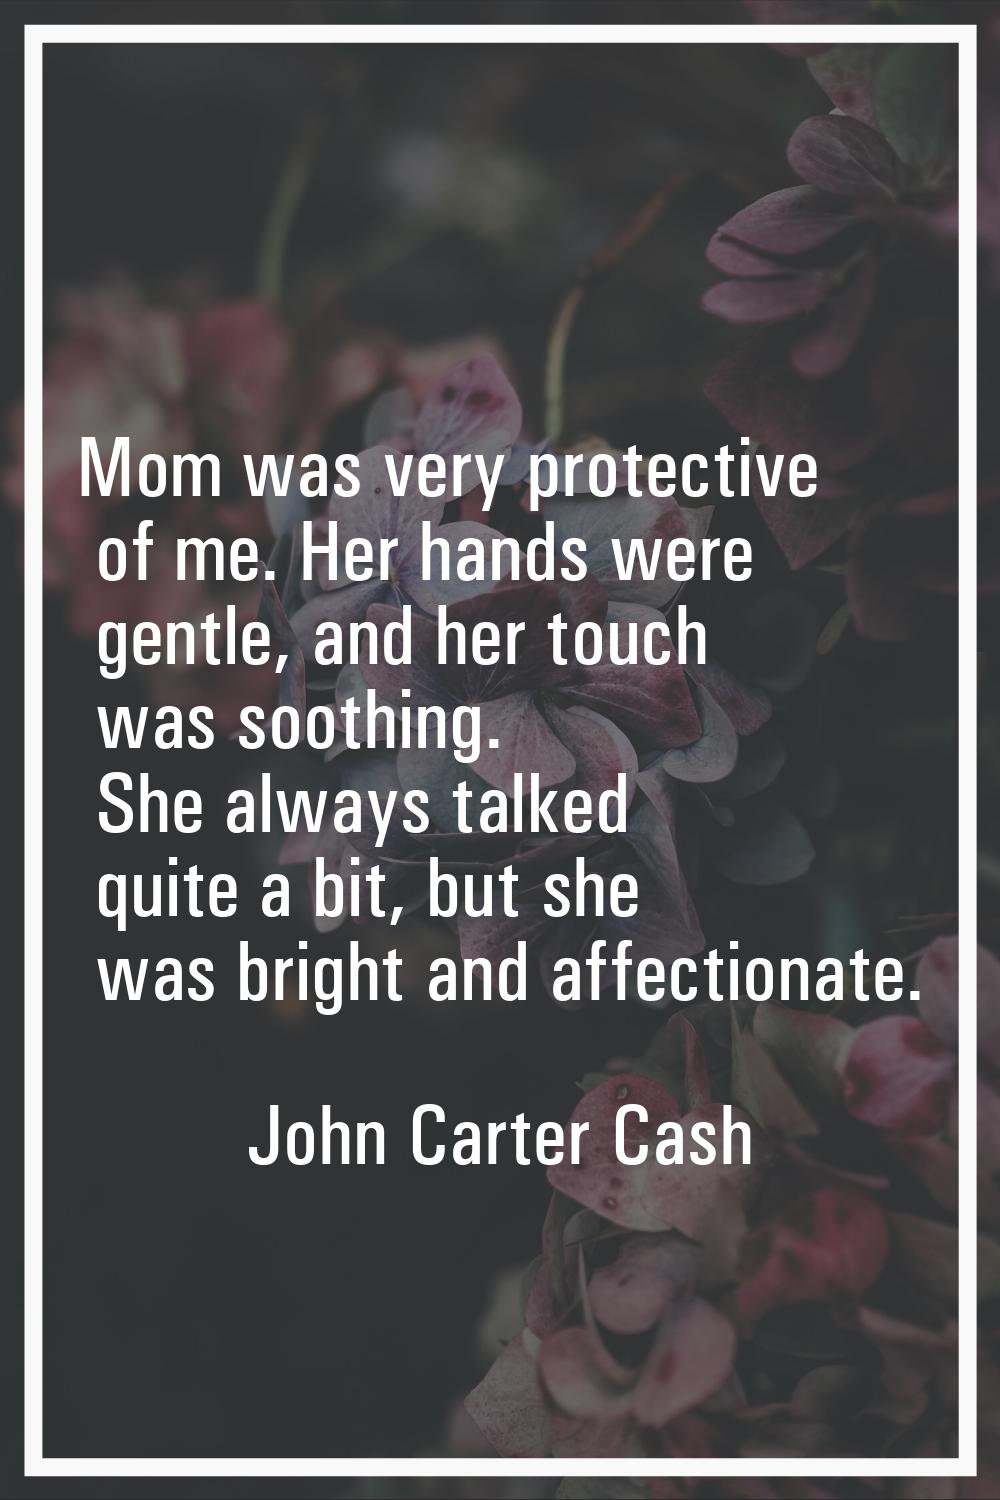 Mom was very protective of me. Her hands were gentle, and her touch was soothing. She always talked